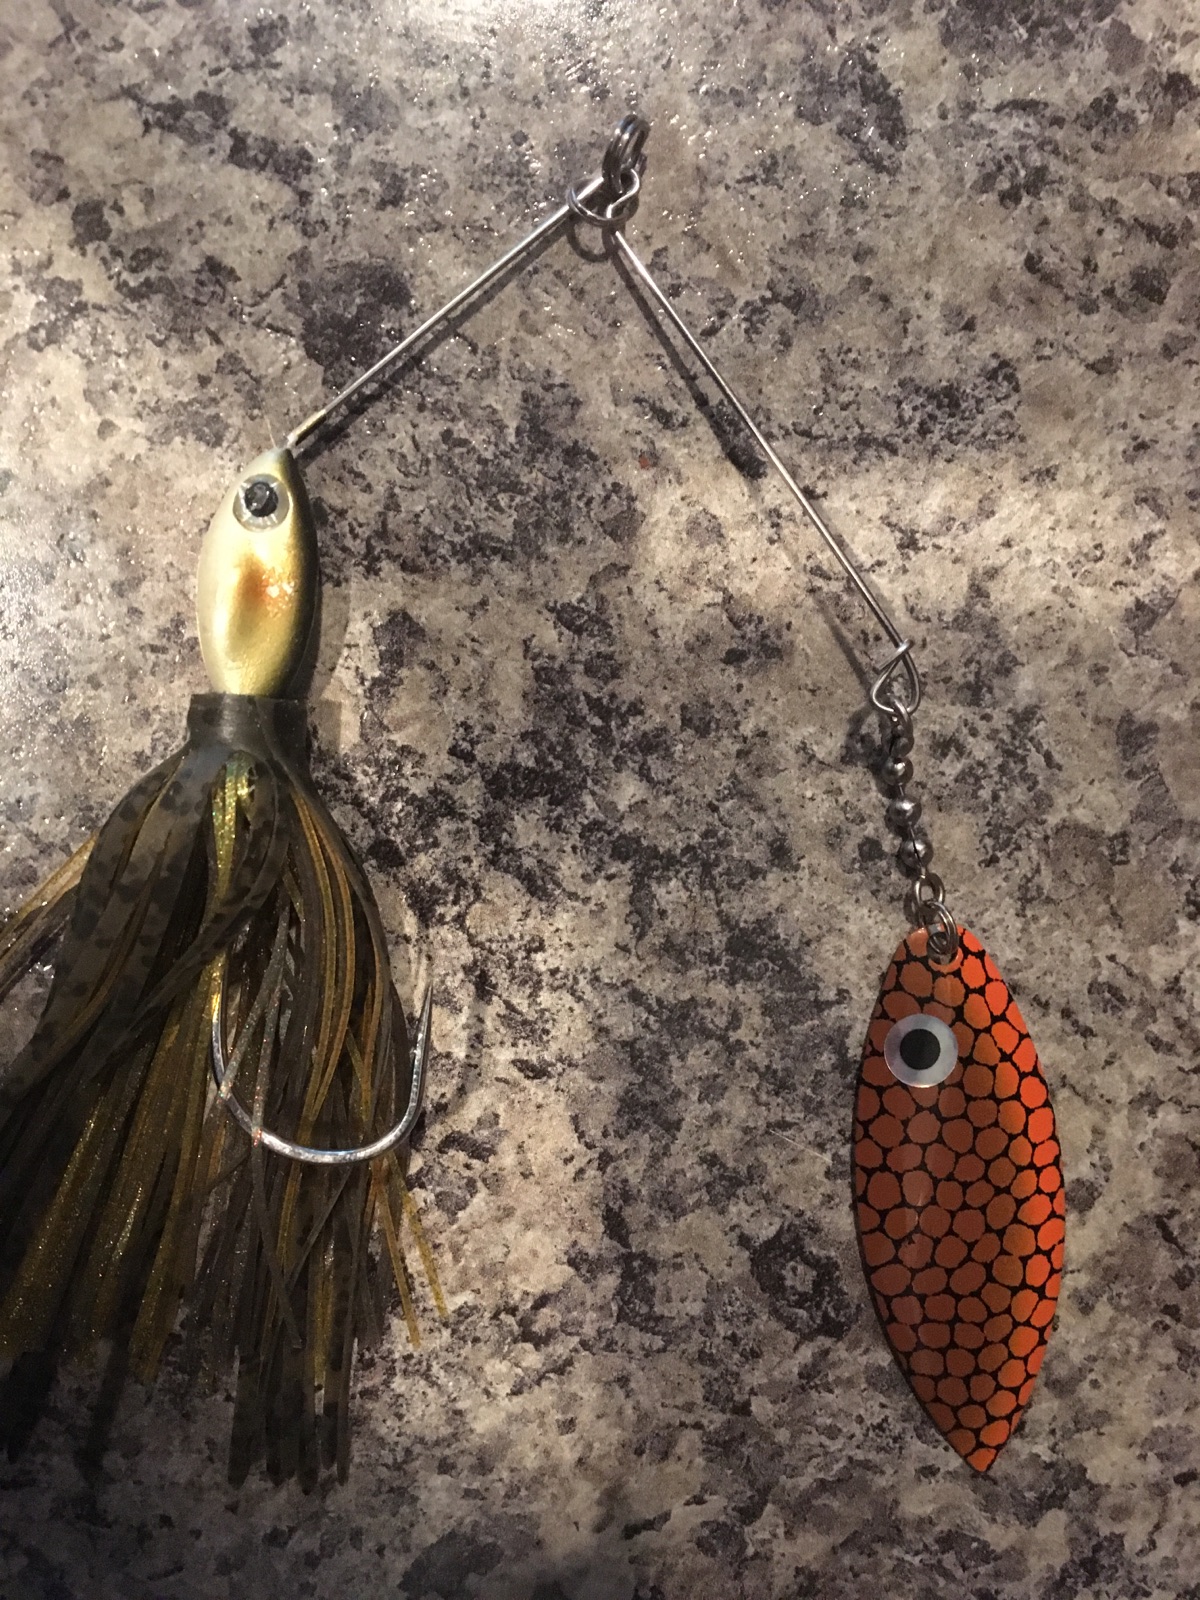 Spinnerbait keeps sliding off swivel - Fishing Tackle - Bass Fishing Forums